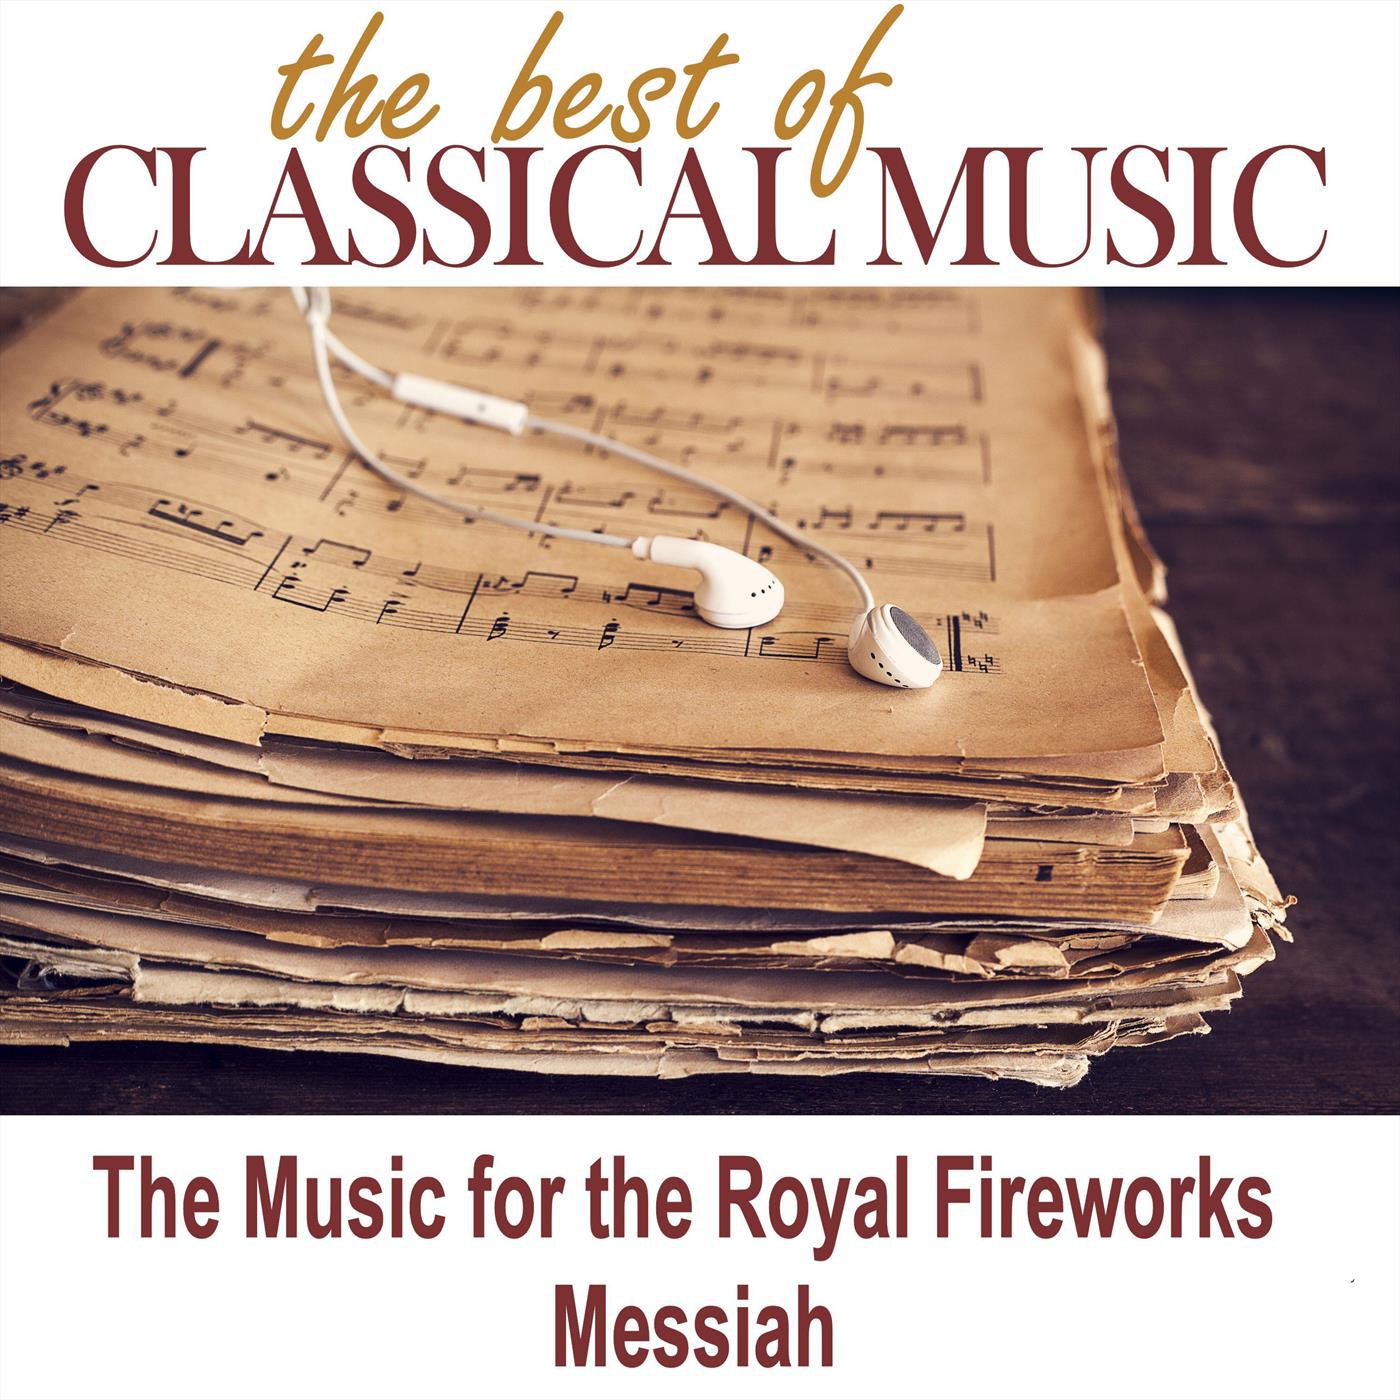 The Best of Classical Music / The Music for the Royal Fireworks, Messiah